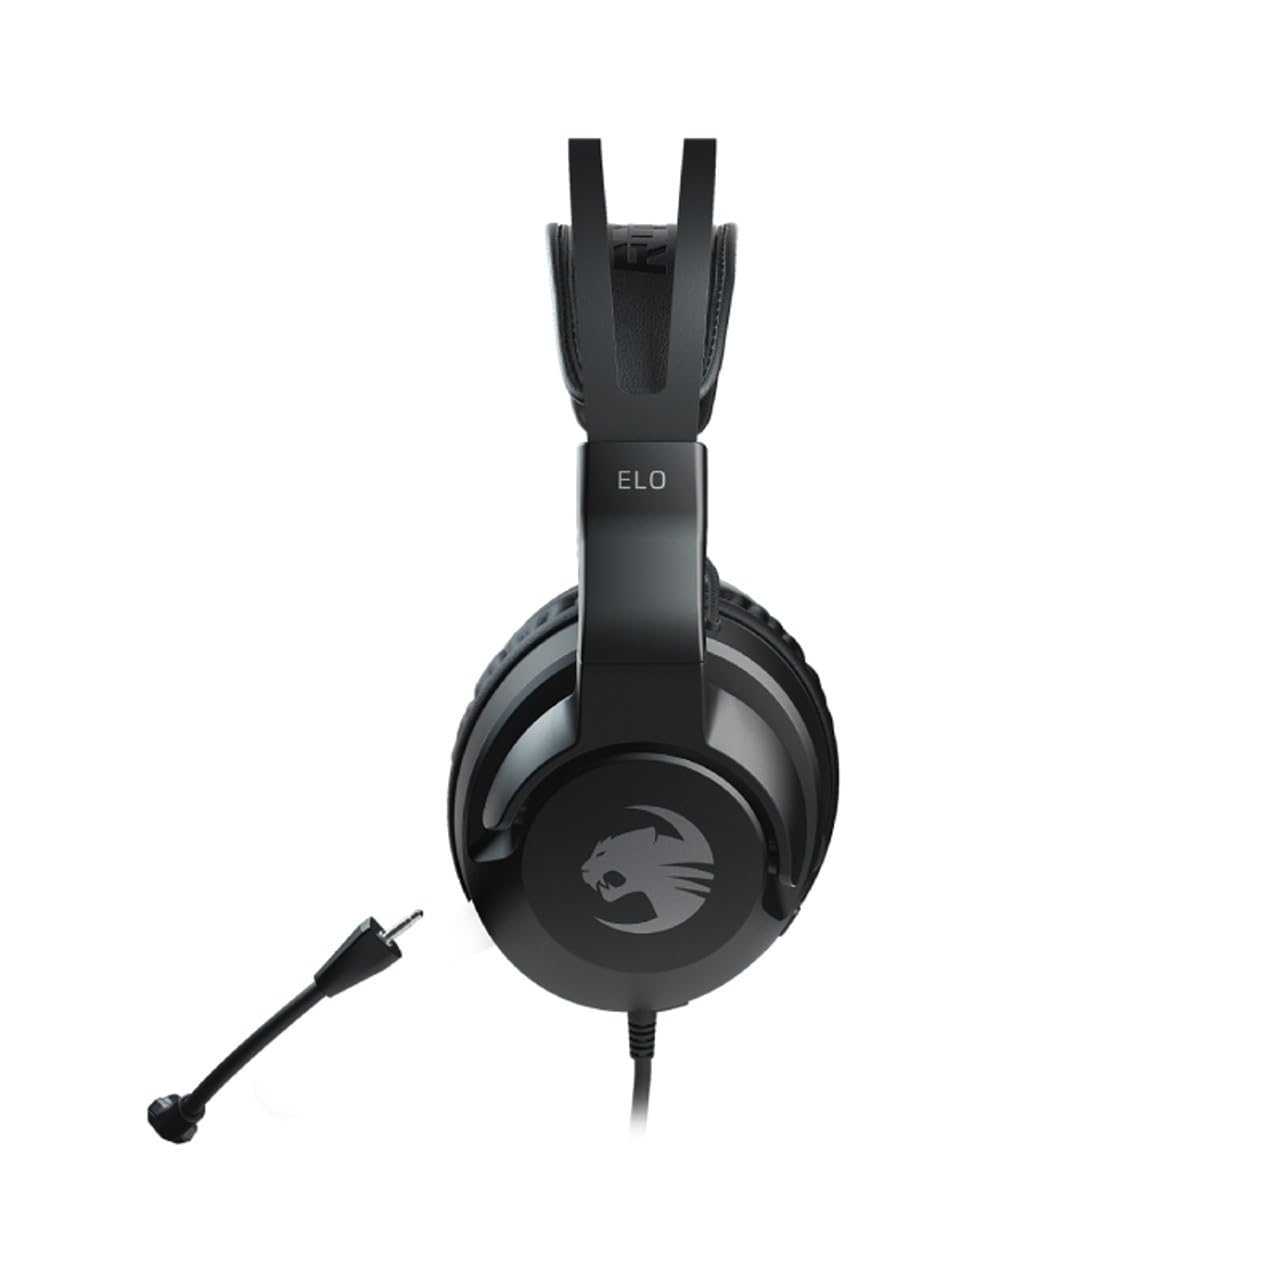 ROCCAT Elo X Stereo PC Gaming Headset, Wired Cross-Platform Headphones for Mac, Xbox Series X|S, Xbox One, PlayStation, and Mobile, Detachable Noise Cancelling Microphone, Lightweight, Black